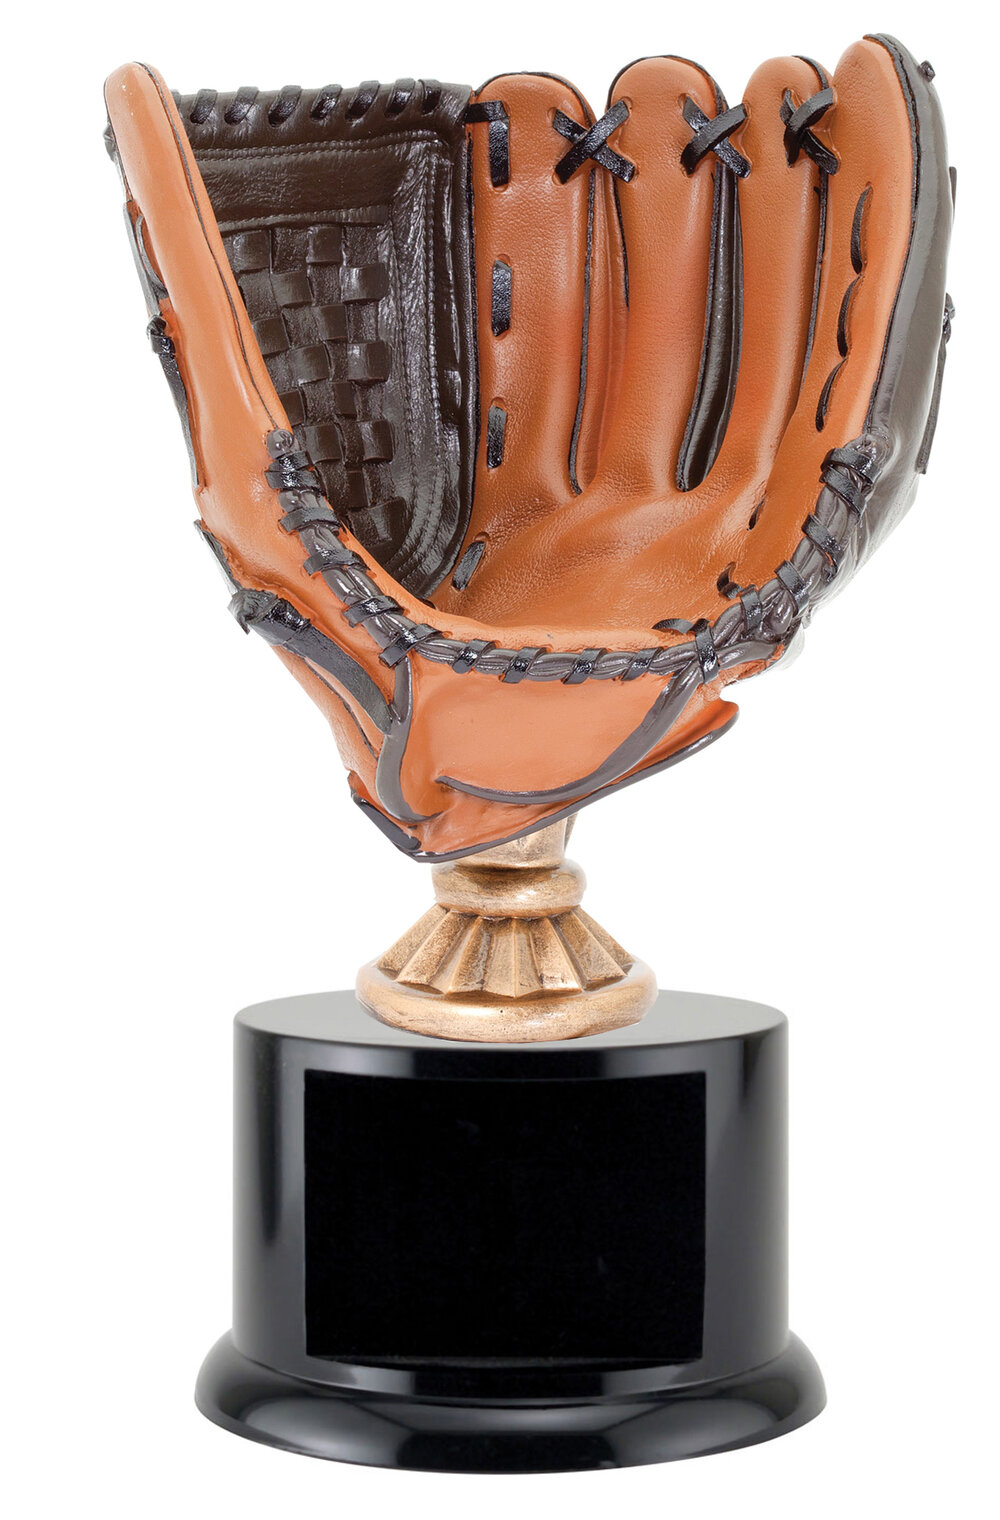 Glove Keeper 15" (Includes Engraving) Gallery Canada, Shop Online, 5000+ Products, Fast Shipping